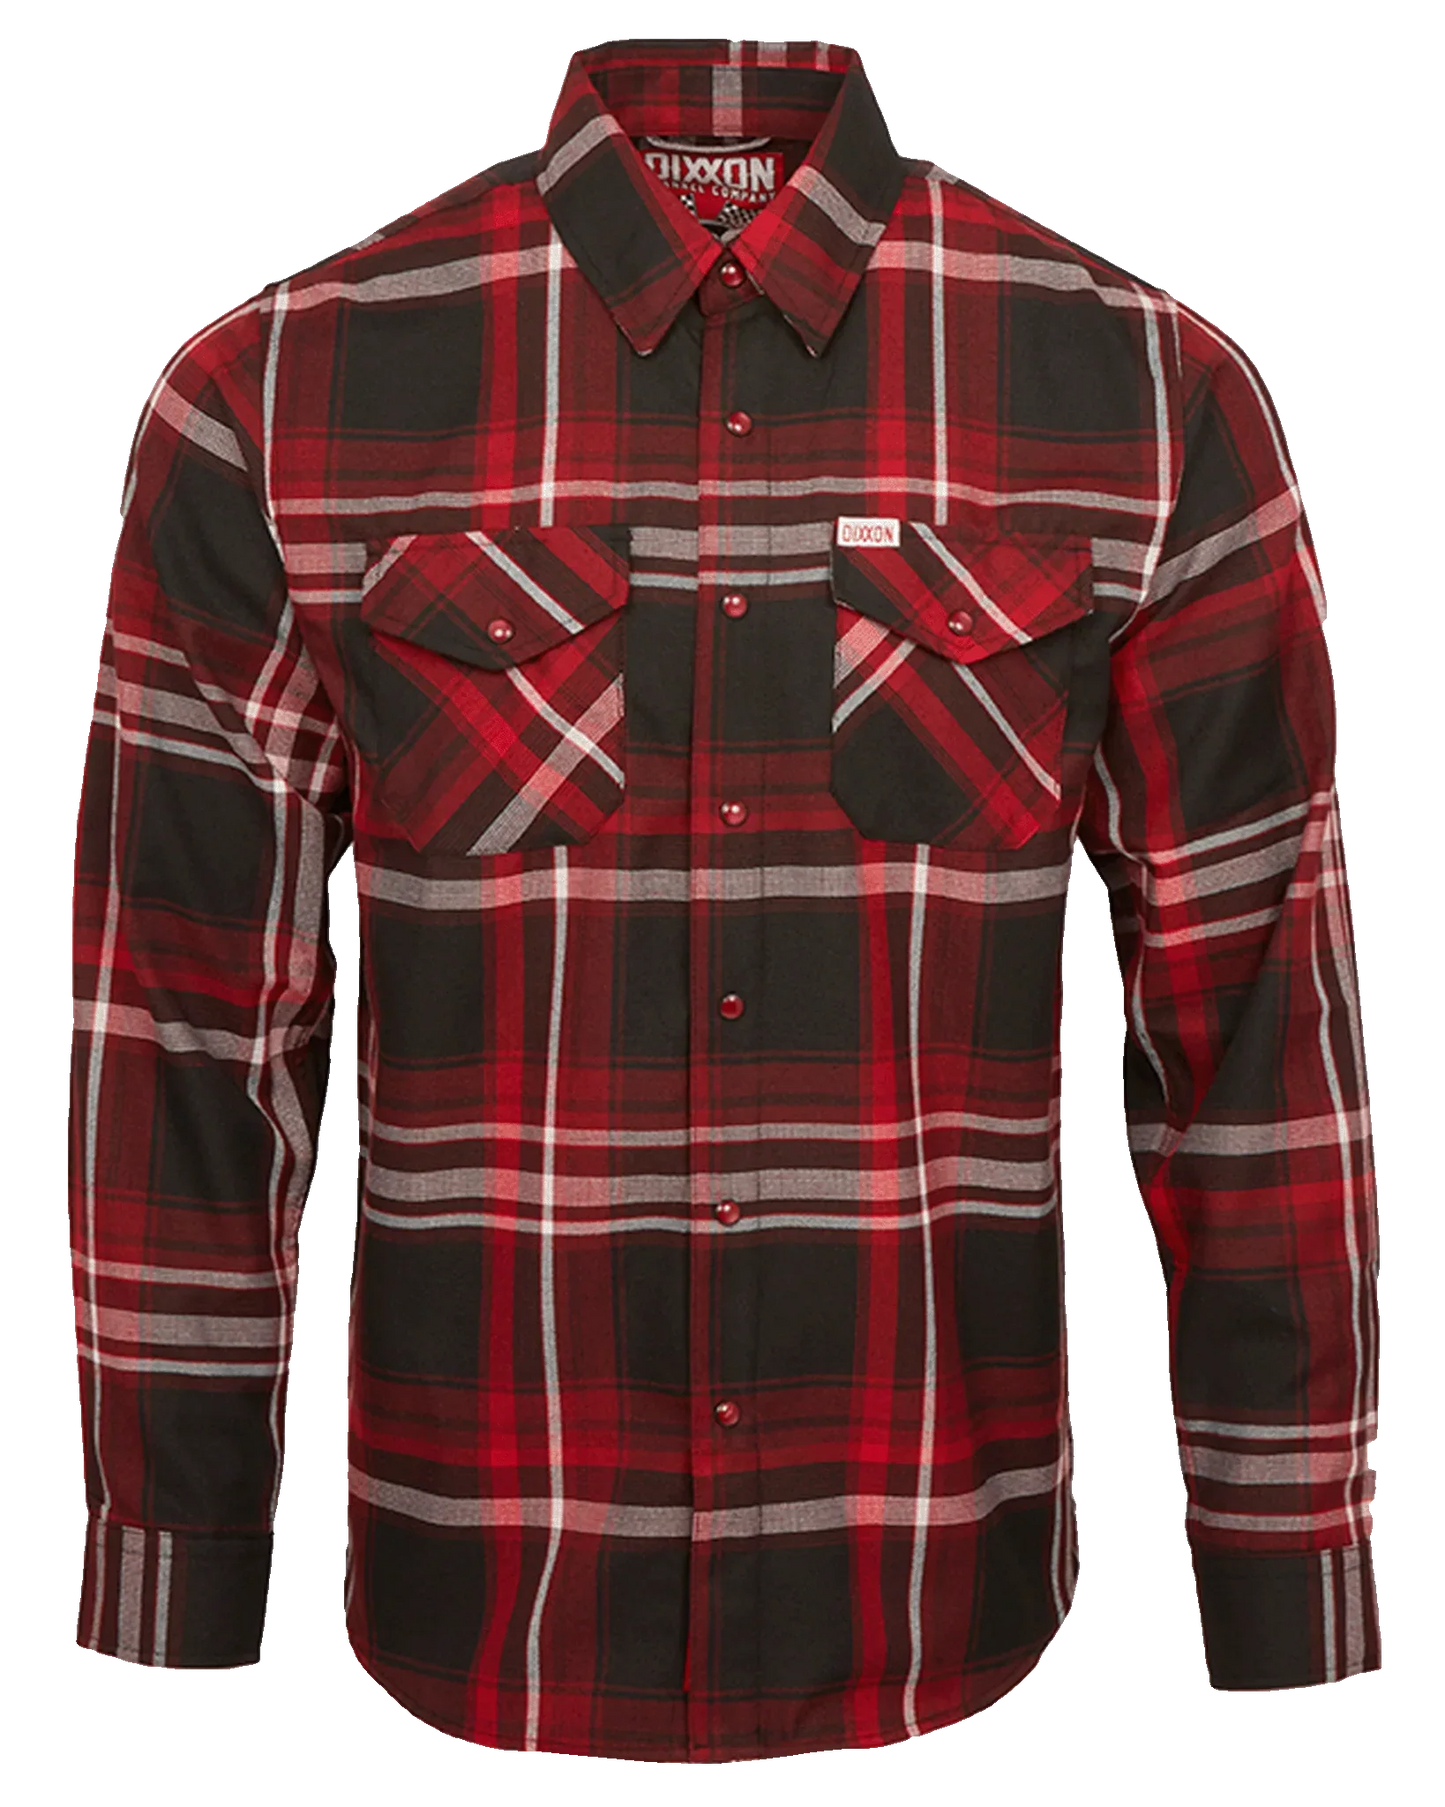 Matchless Flannel by Dixxon Flannel Co. - Harley Davidson of Quantico